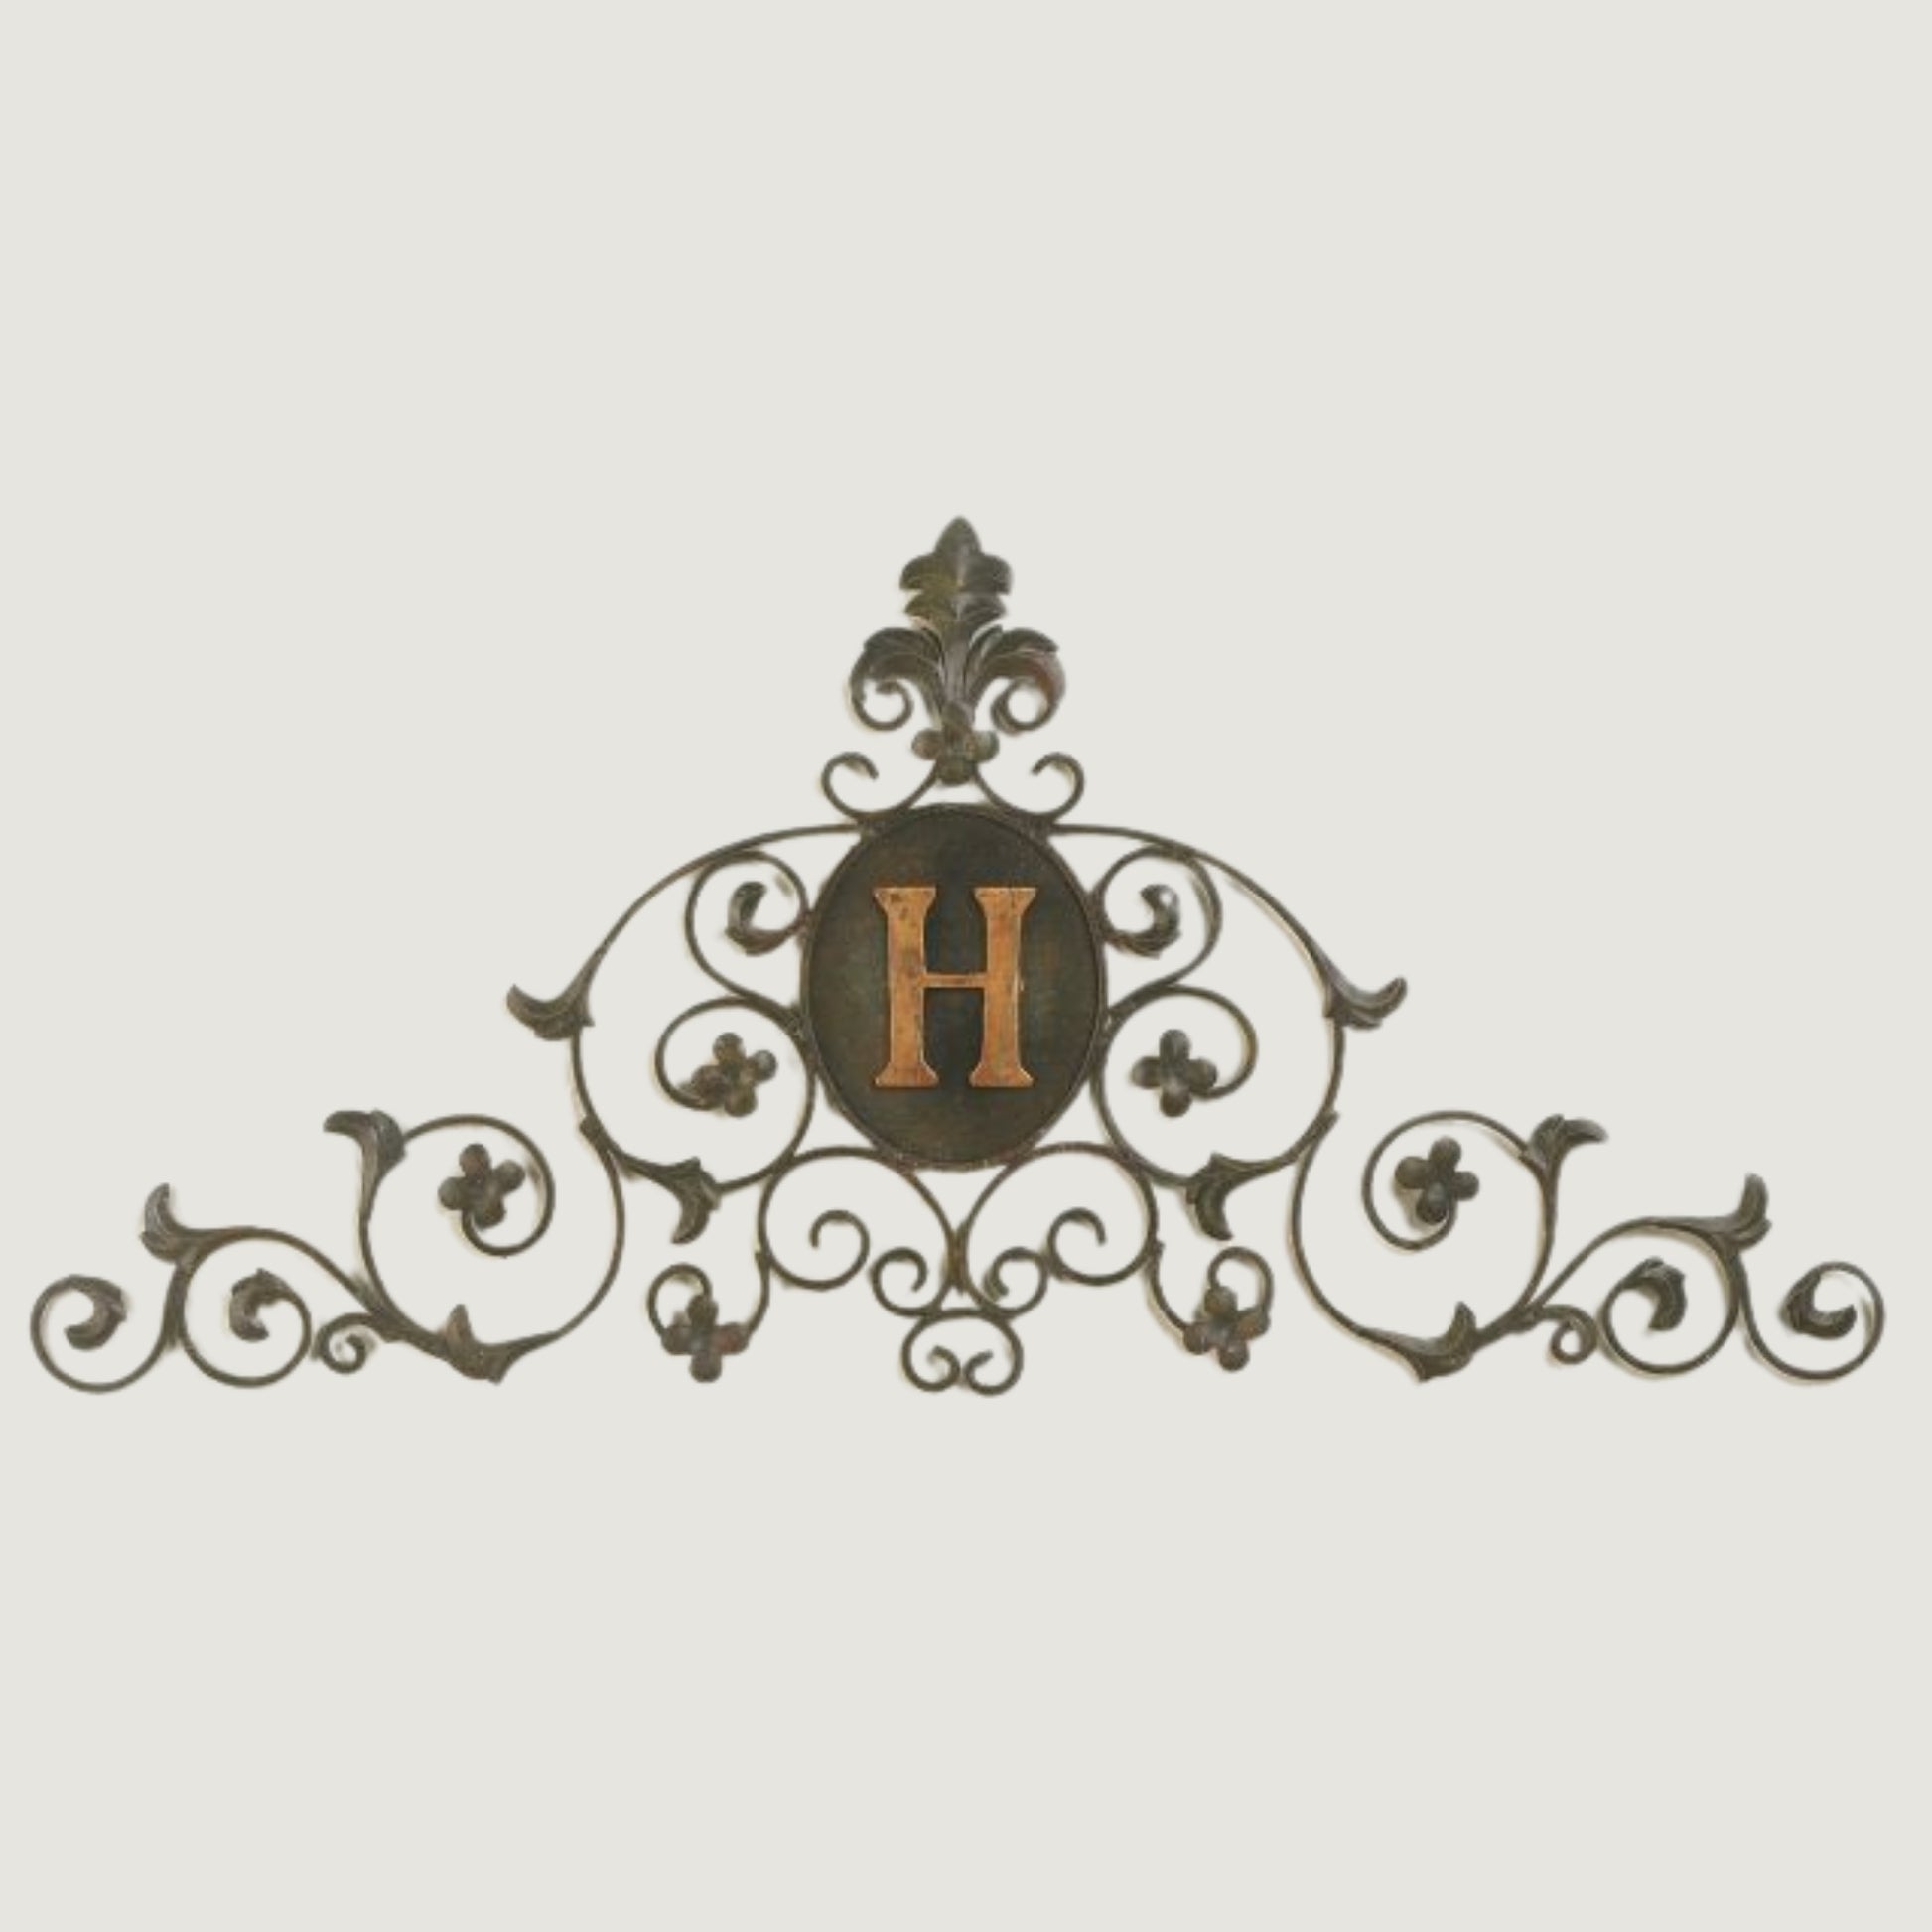 Leaf and Fleur de Lis Iron Monogrammed Wall Grille - Monogram Wall Decor | Estate Quality Home Decor | Personalized Wall Decor | Shown with the Monogram "H" | Iron finished in a faux green brown stain with Italian gold 5" monogram | INSIDE OUT | InsideOutCatalog.com